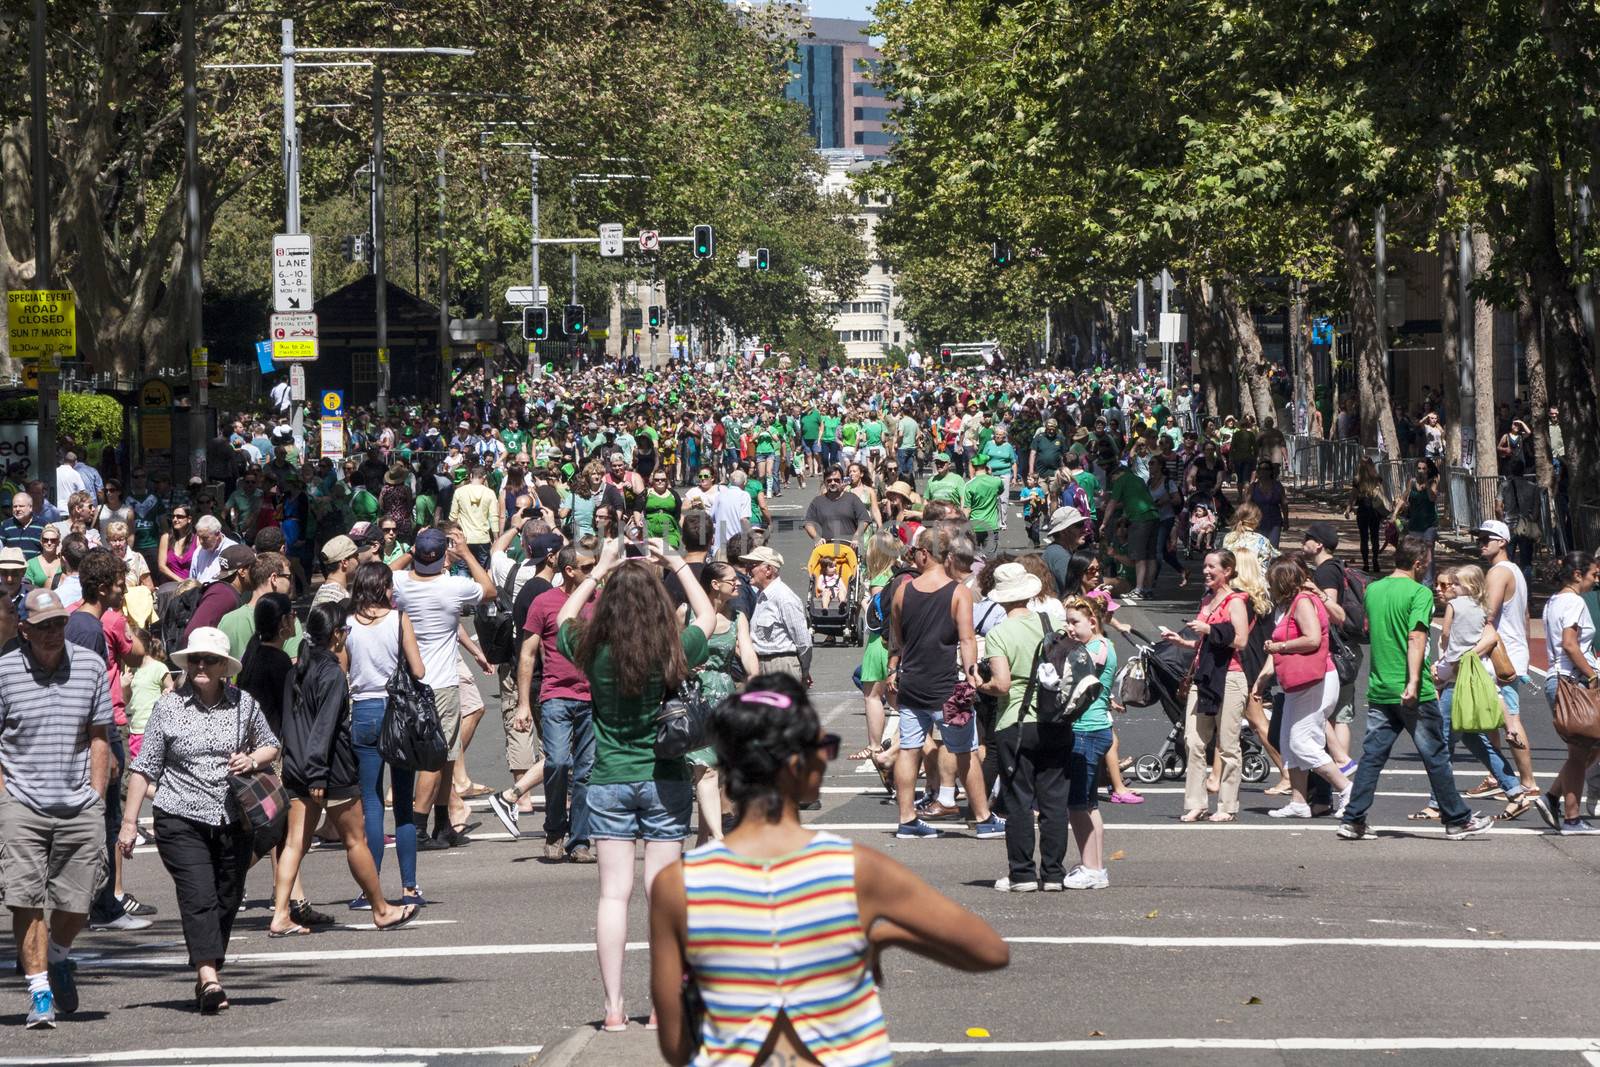 SYDNEY, AUSTRALIA - Mar 17TH: Crowds celebrating St Patrick's Day on March 17th 2013. Australia has marked the occasion since 1810 when Governor Macquarie declared it a celebration.